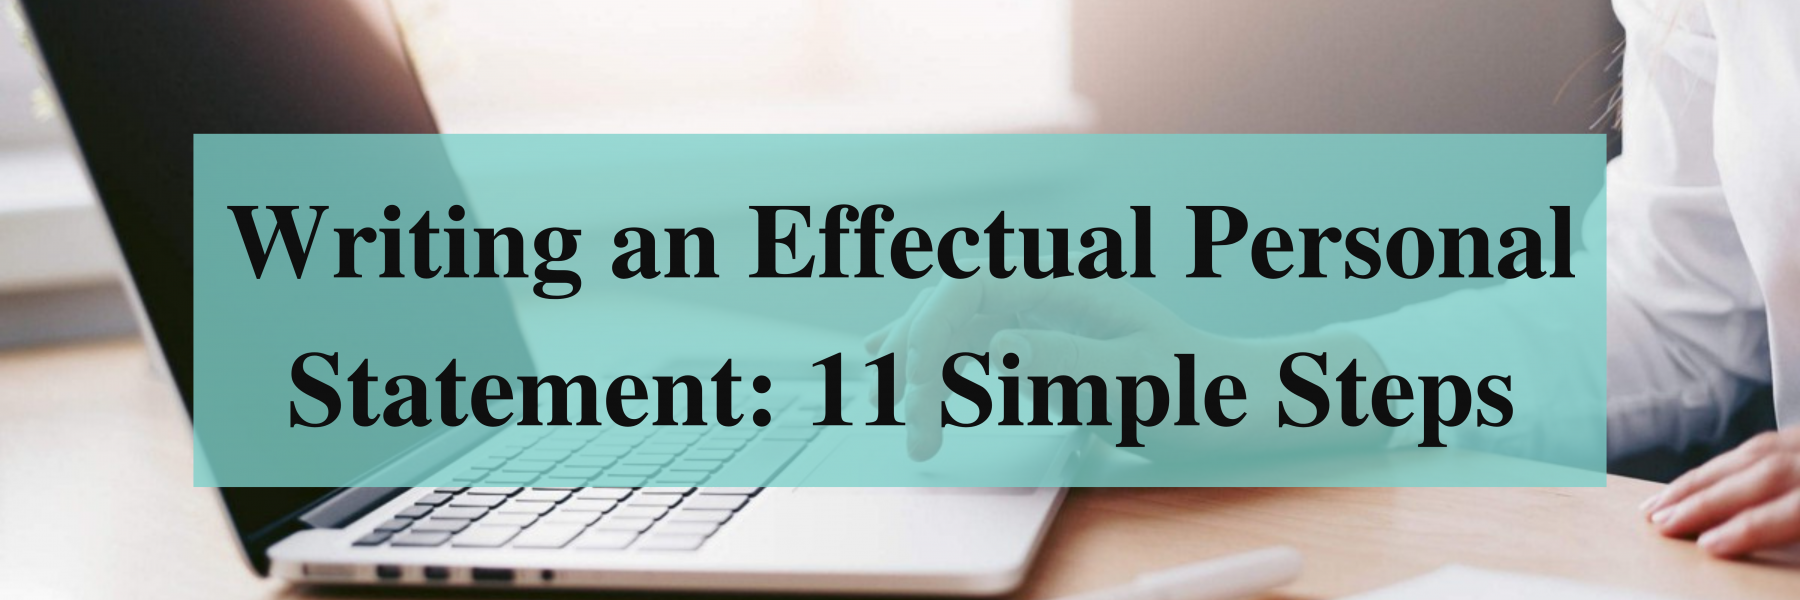 Simple steps to write an effectual personal statement by expert personal statement writers in UK